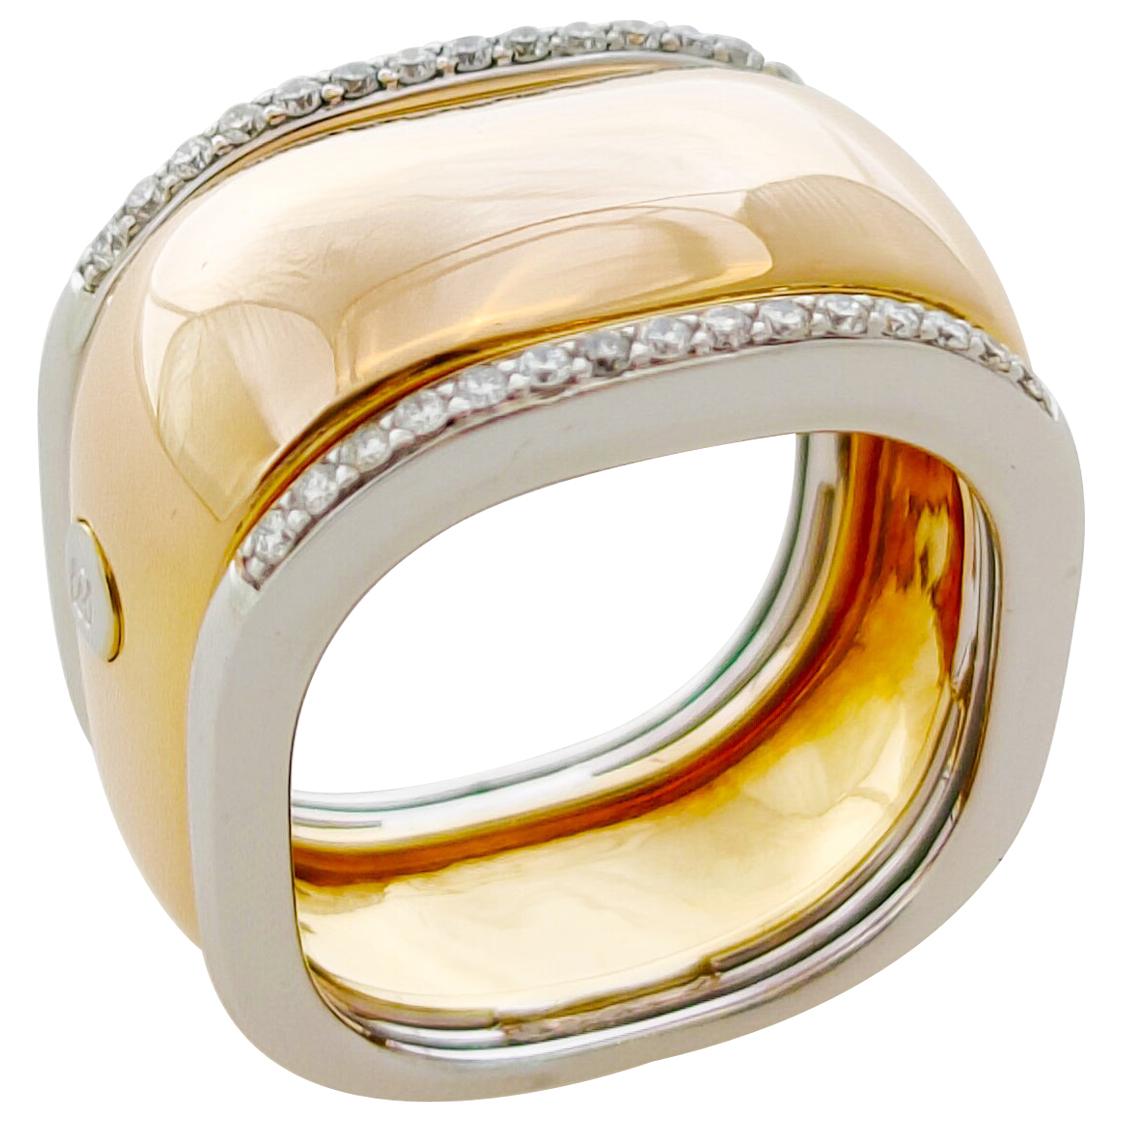 Majestic Fancy Squared Gold Ring